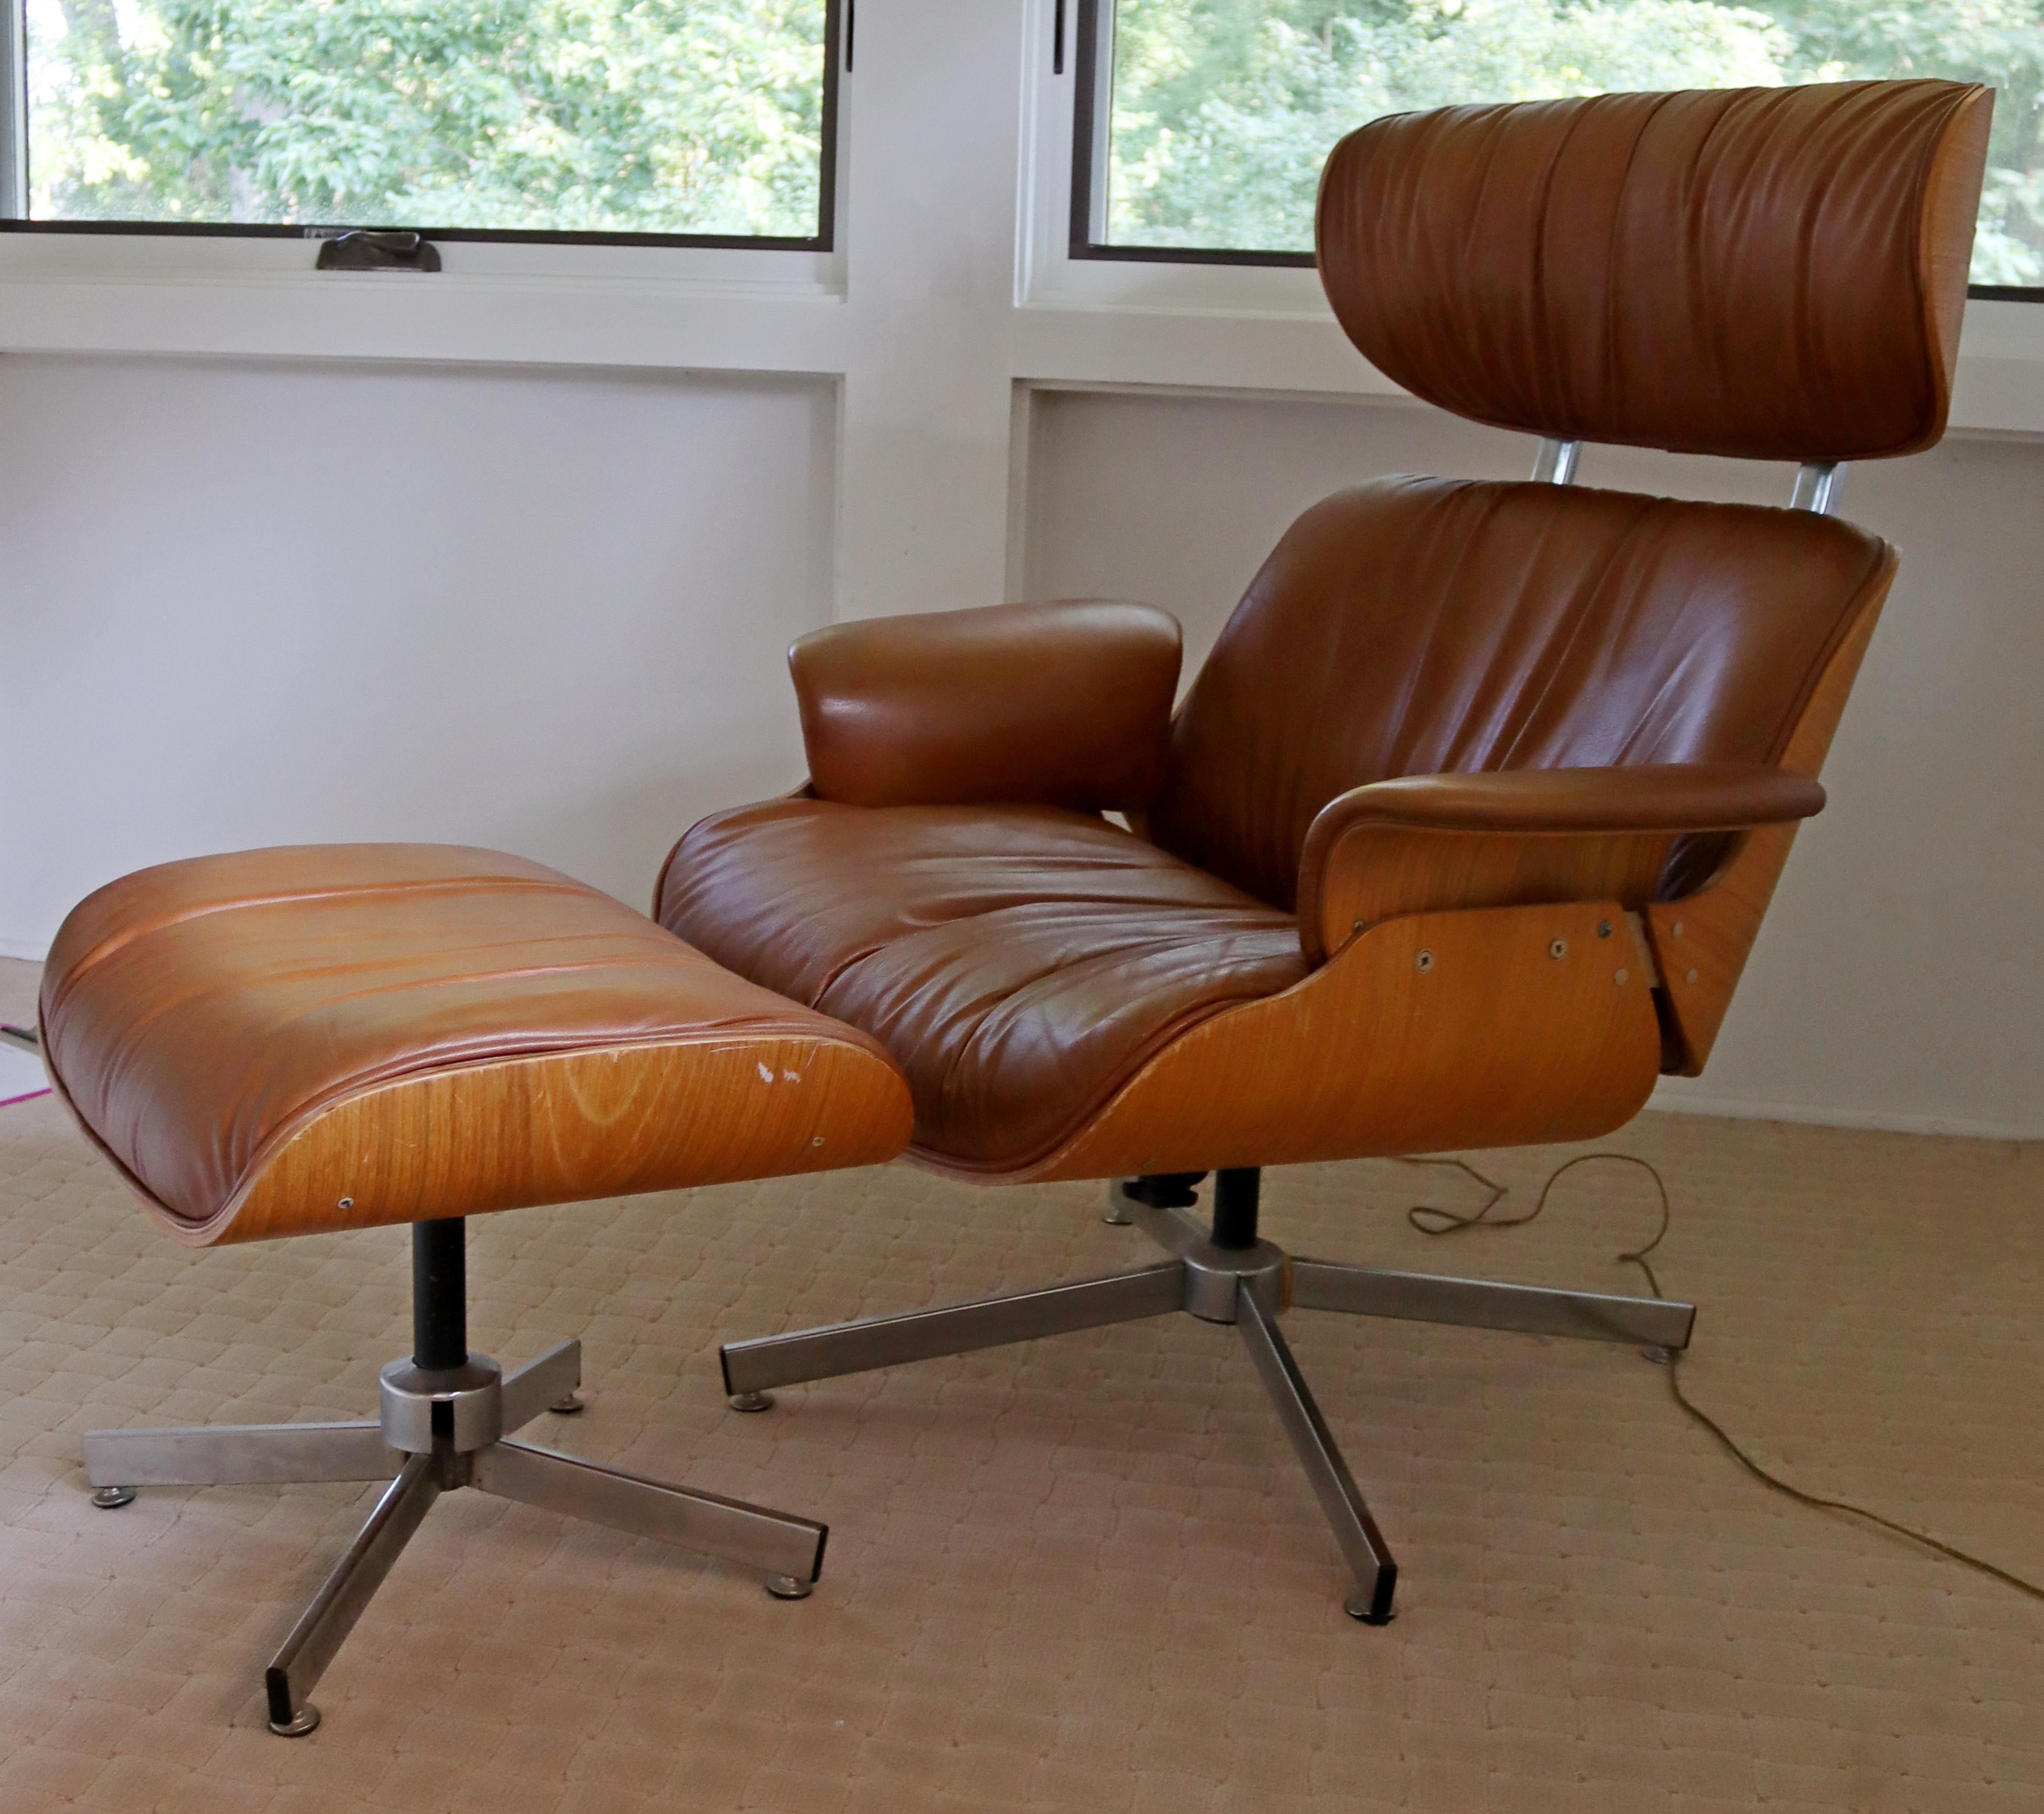 Late 20th Century Mid-Century Modern Selig Lounge Chair & Ottoman 1970s Brown Eames Style